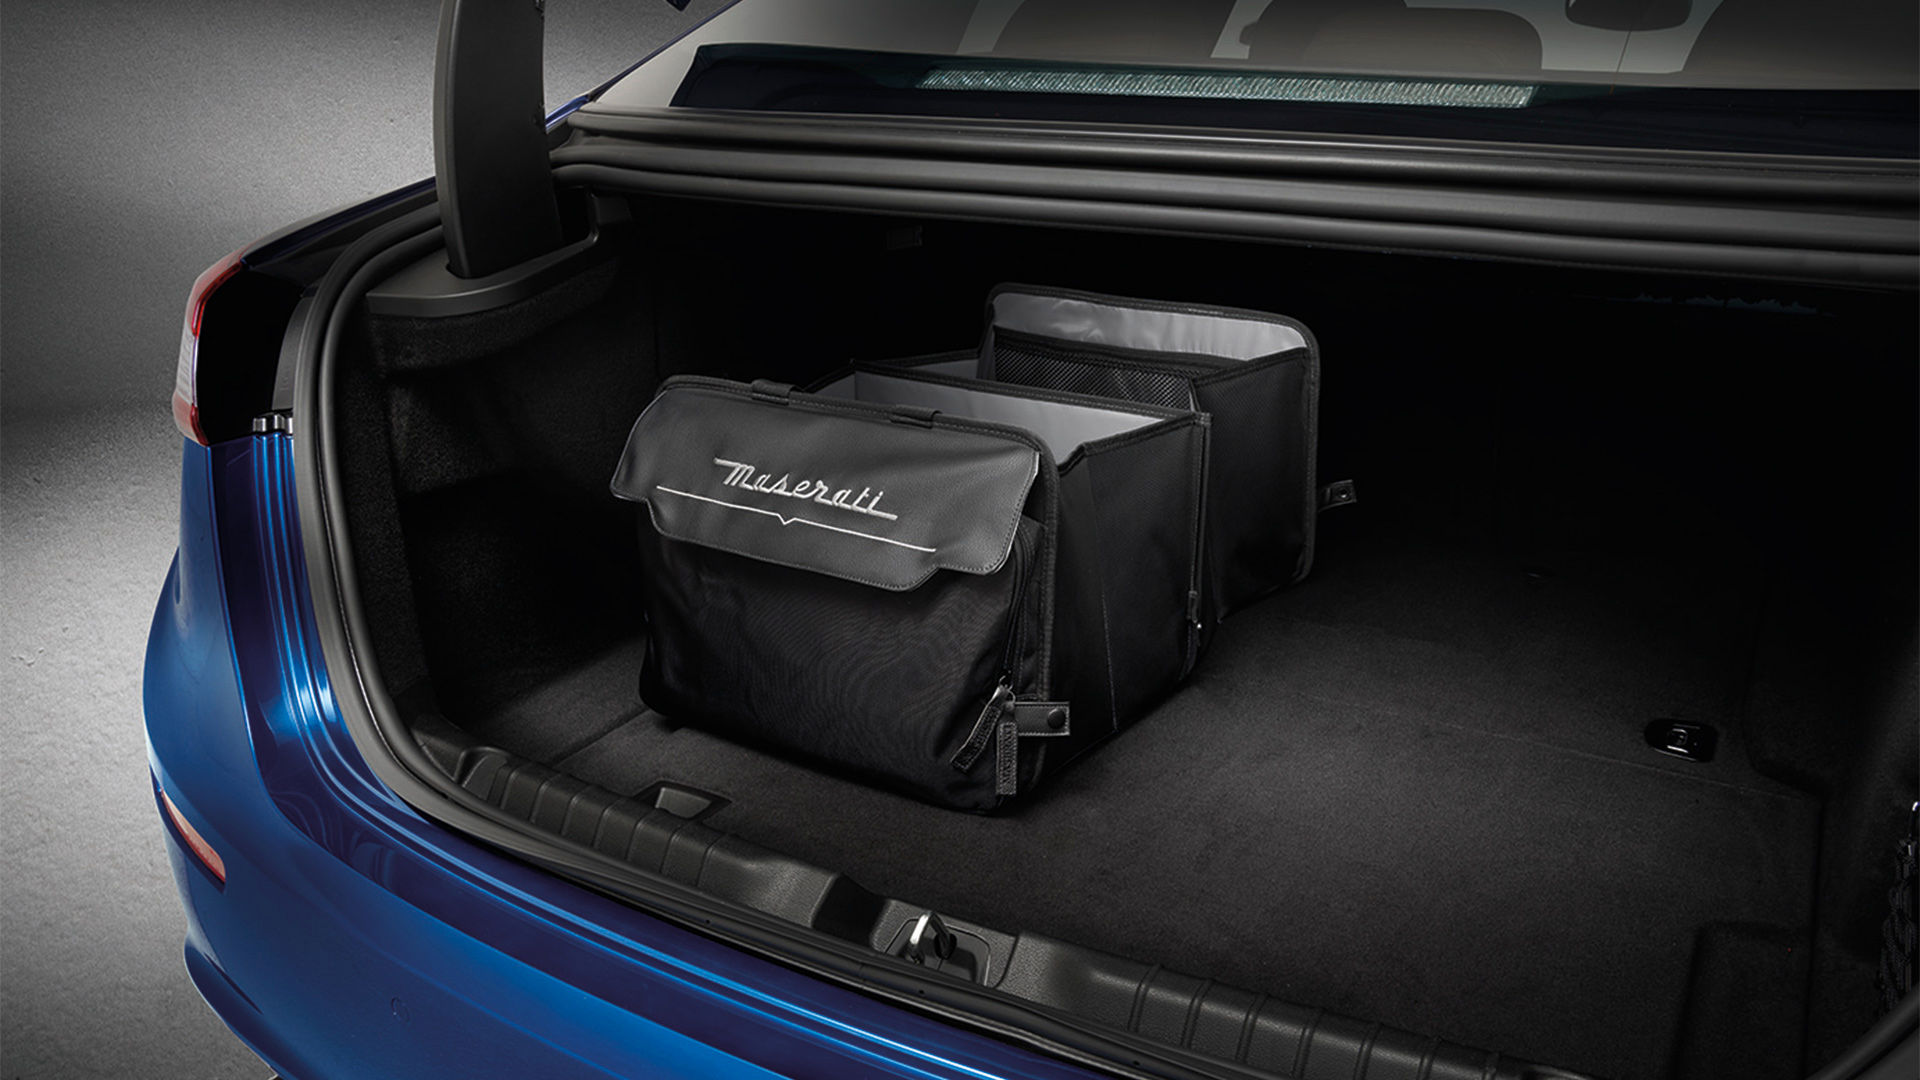 Containers inside the trunk of Maserati Ghibli